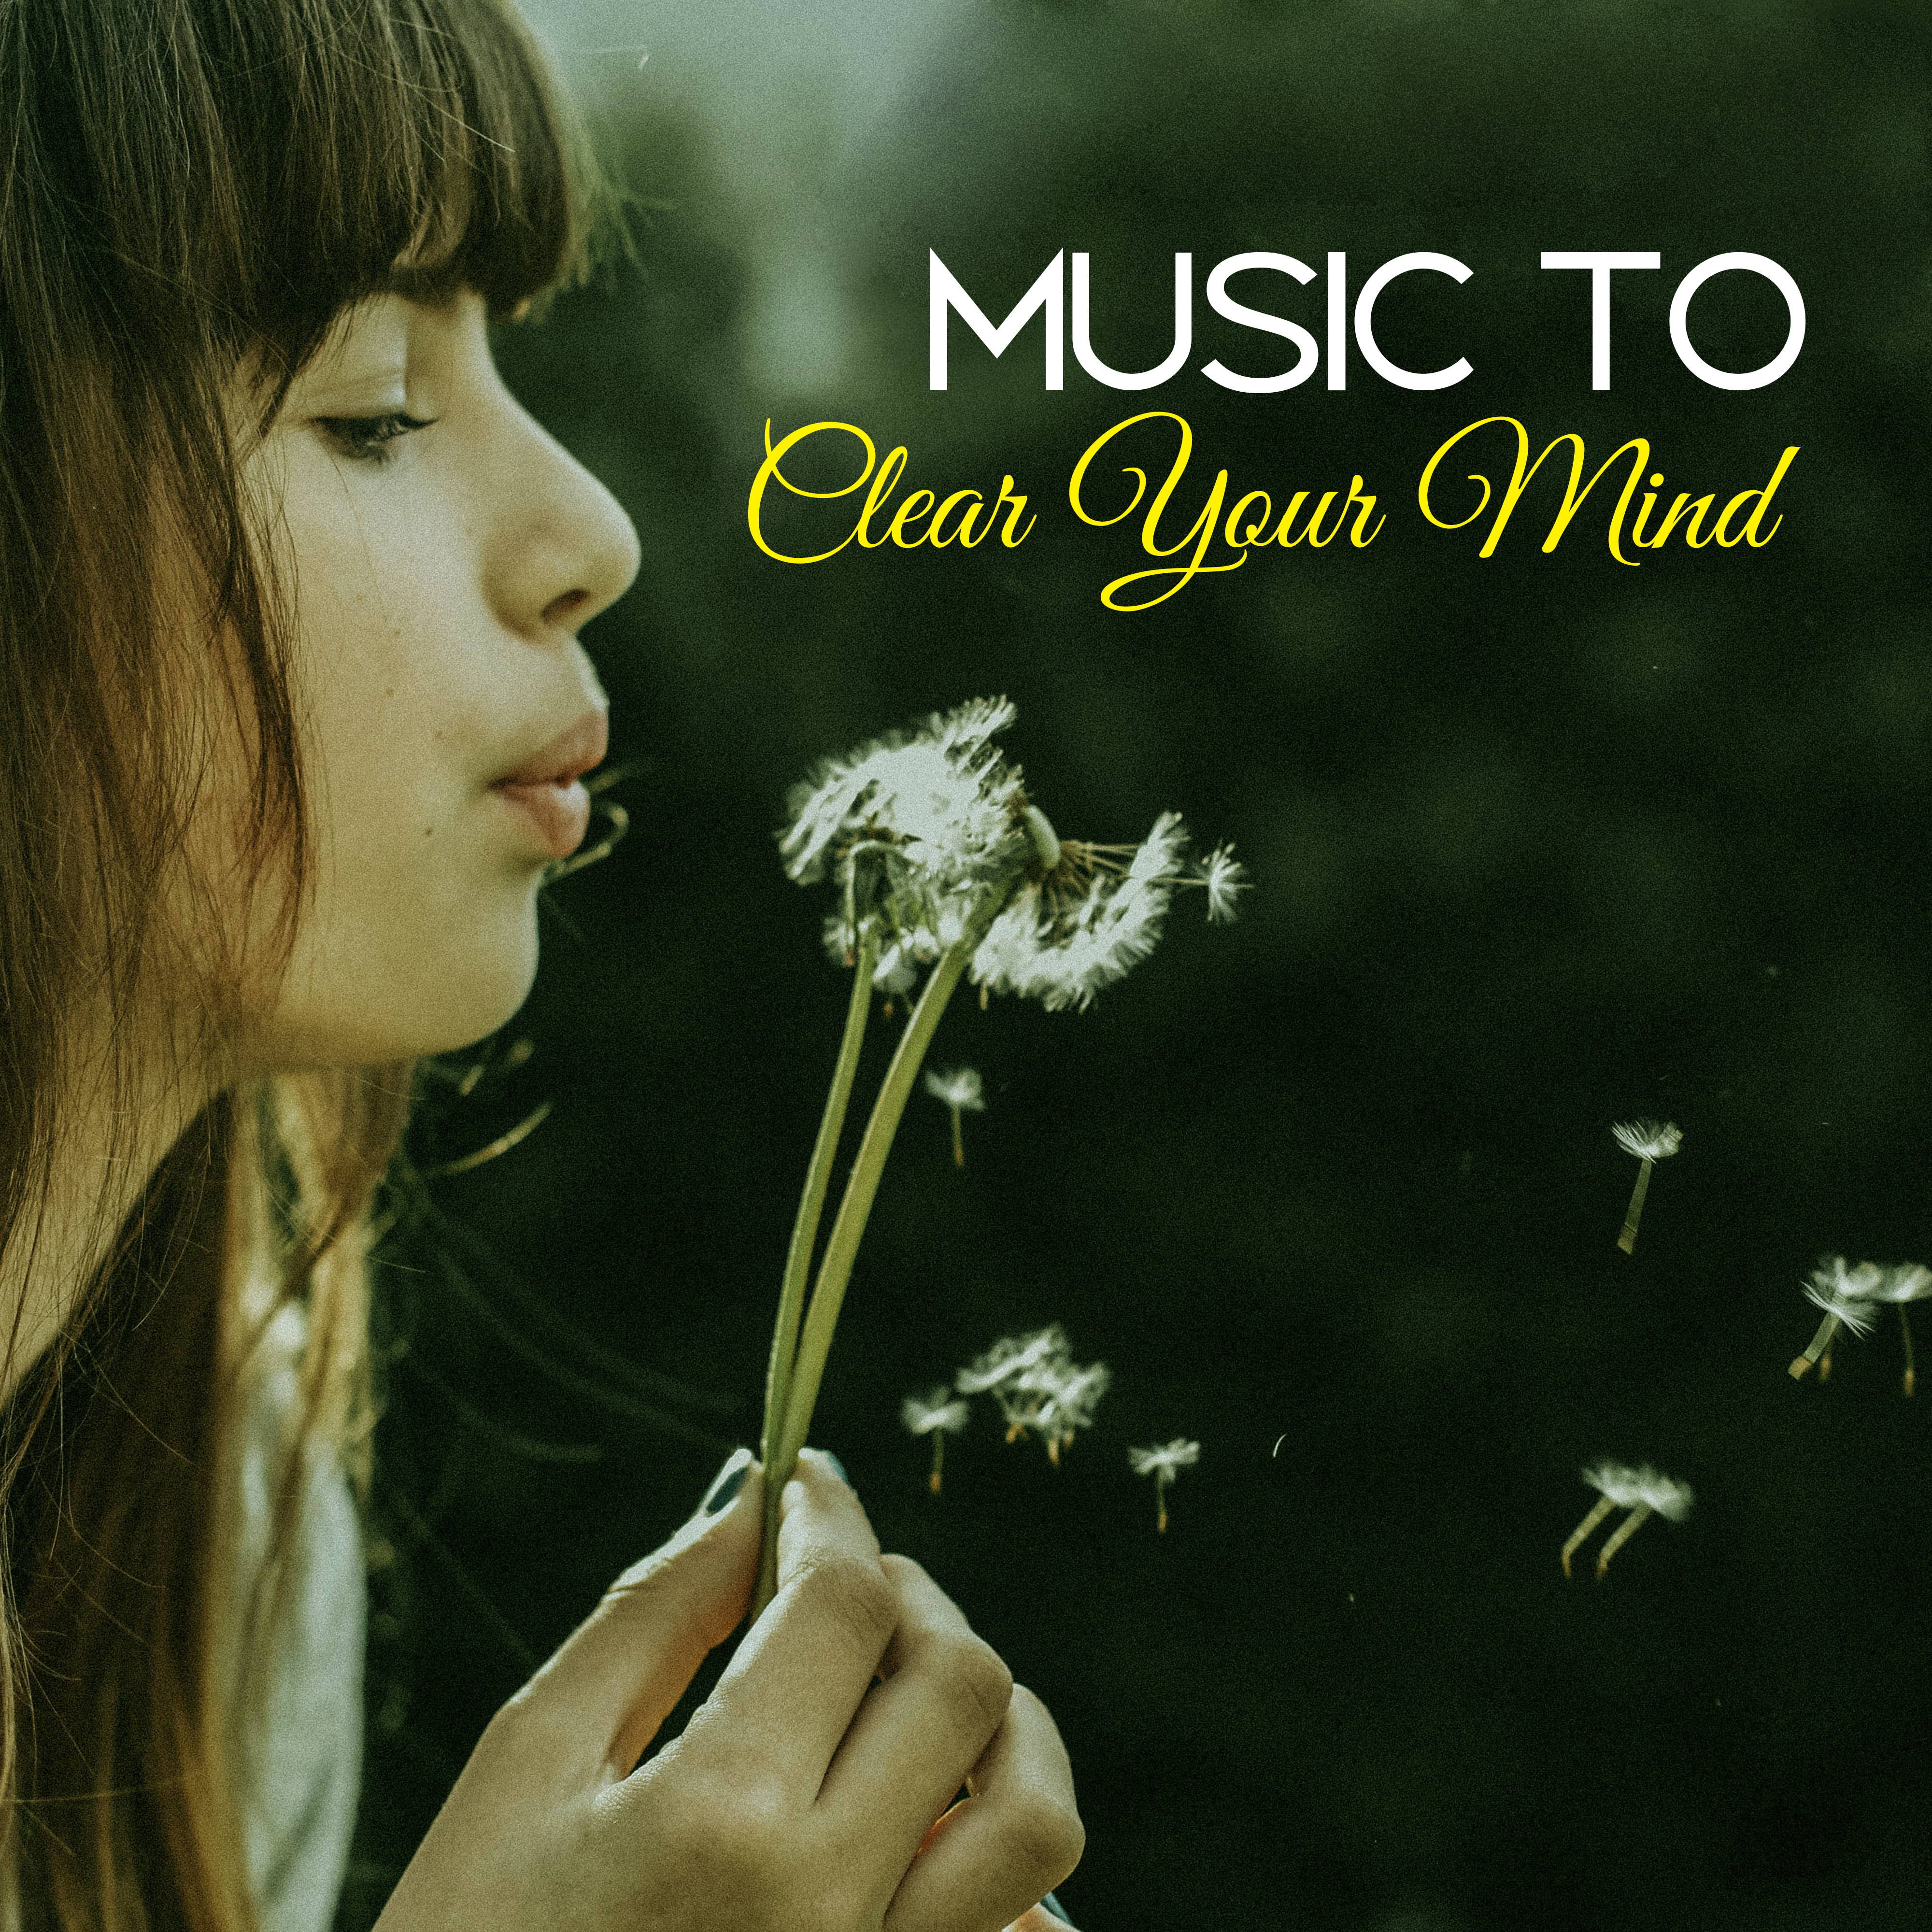 Music to Clear Your Mind – Easy Listening, Relaxation Sounds, Mind Calmness, Peaceful Melodies, New Age Music, Rest a Bit